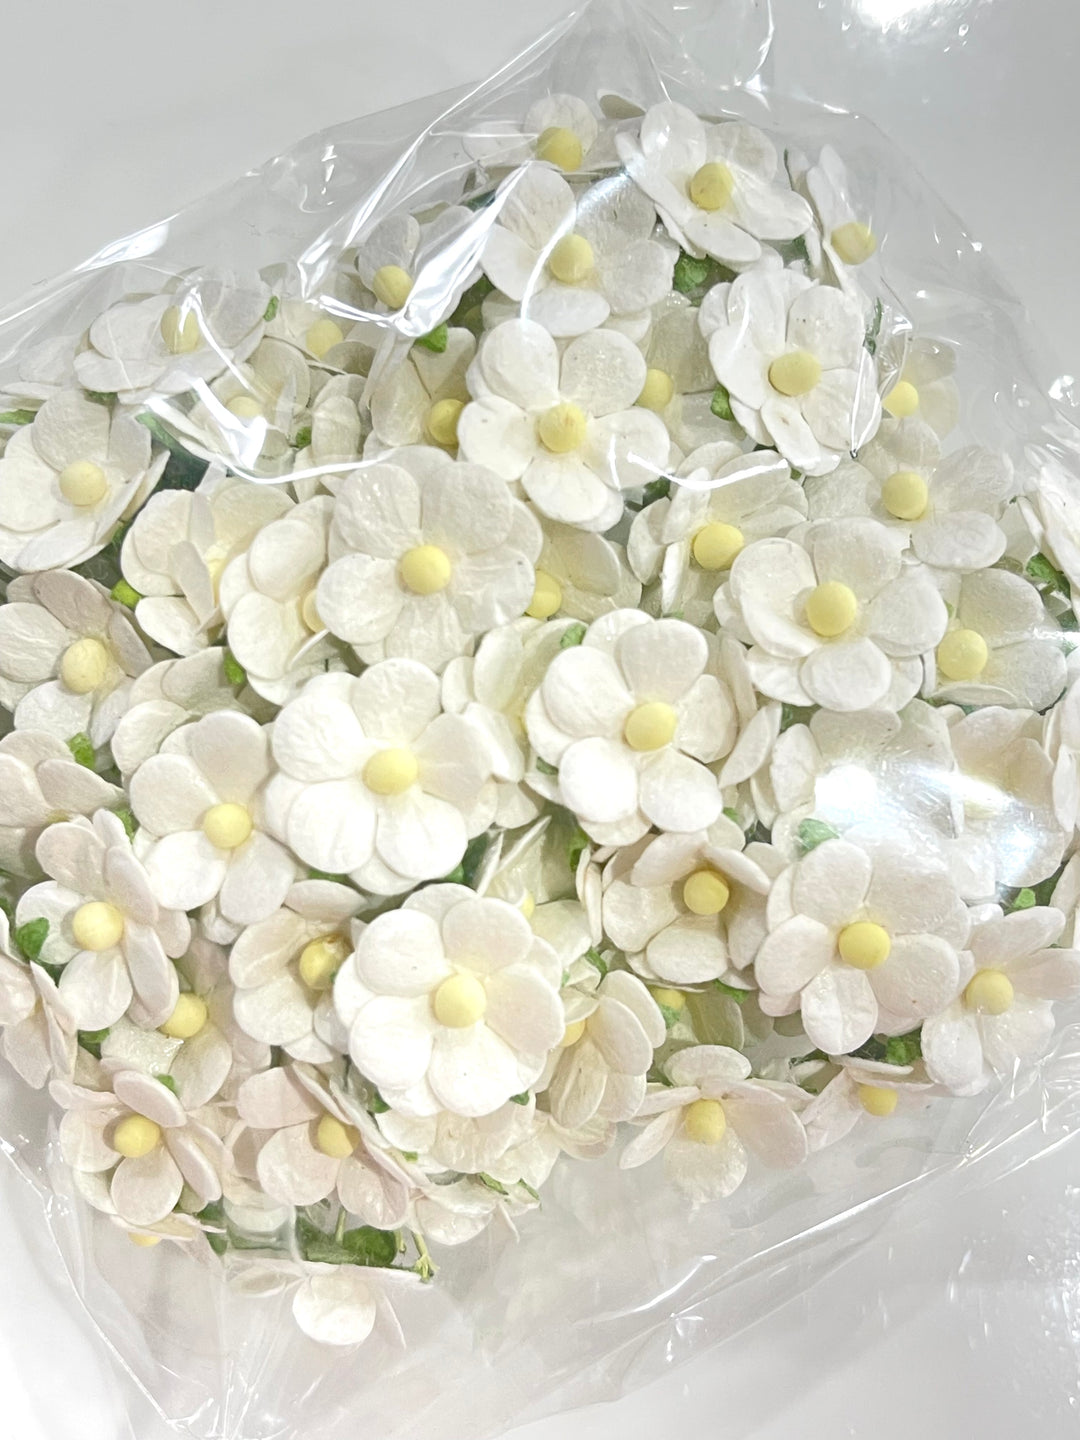 PREORDER 15mm White Sweetheart Blossoms Mulberry Paper Flowers - Bulk 50 or 100 packs